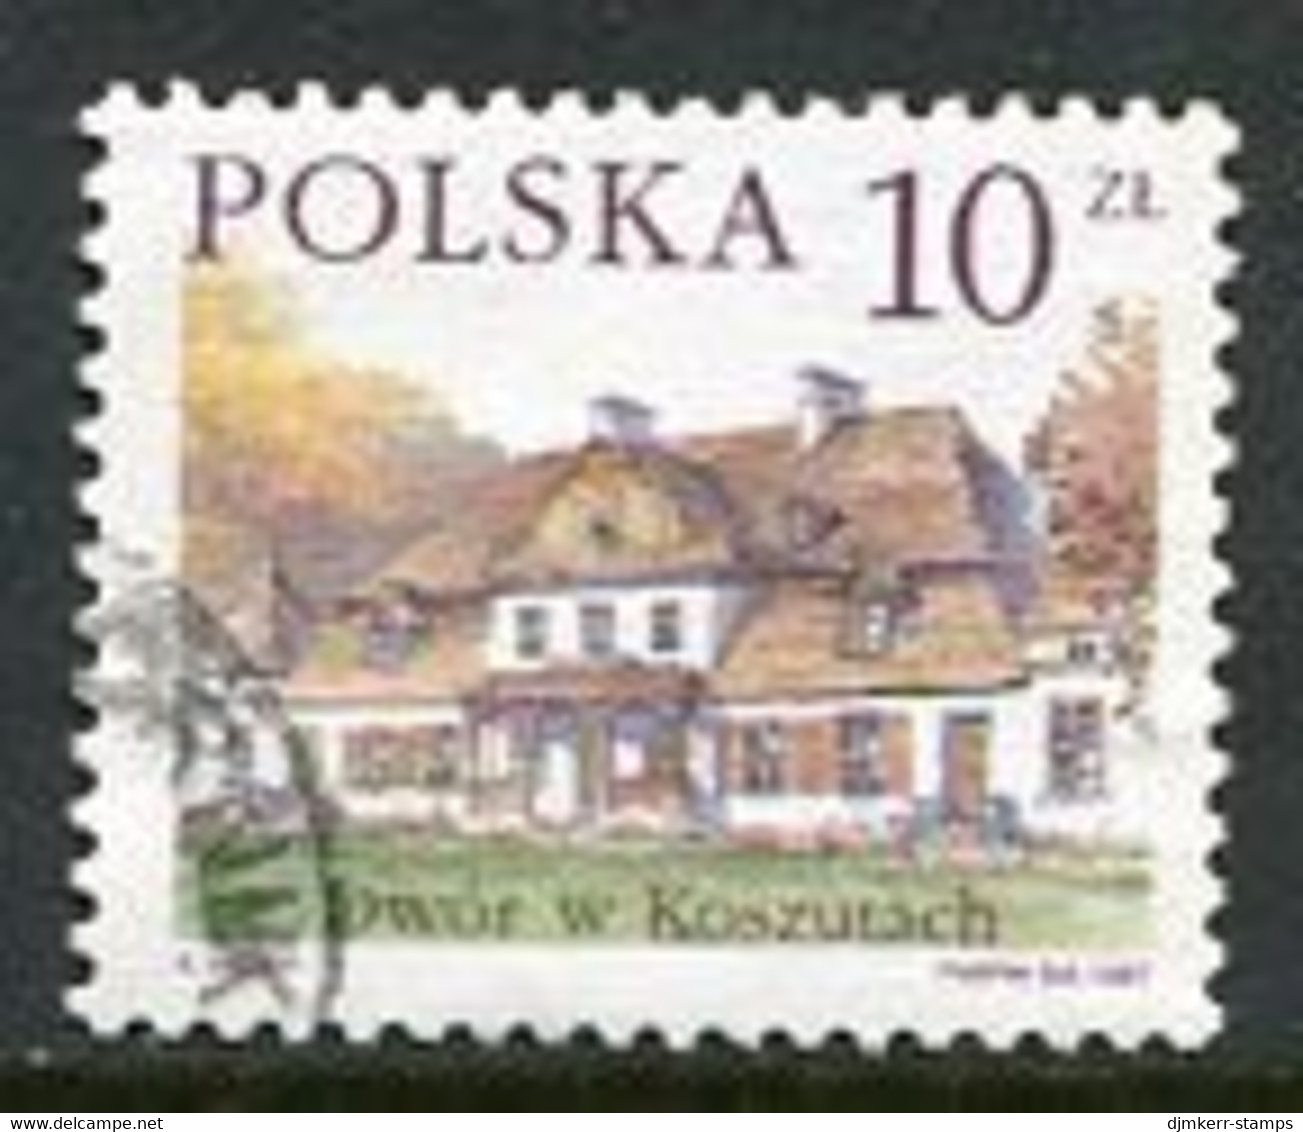 POLAND 1997 Definitive: Manor Houses 10 Zl. Used.  Michel .3654 - Used Stamps